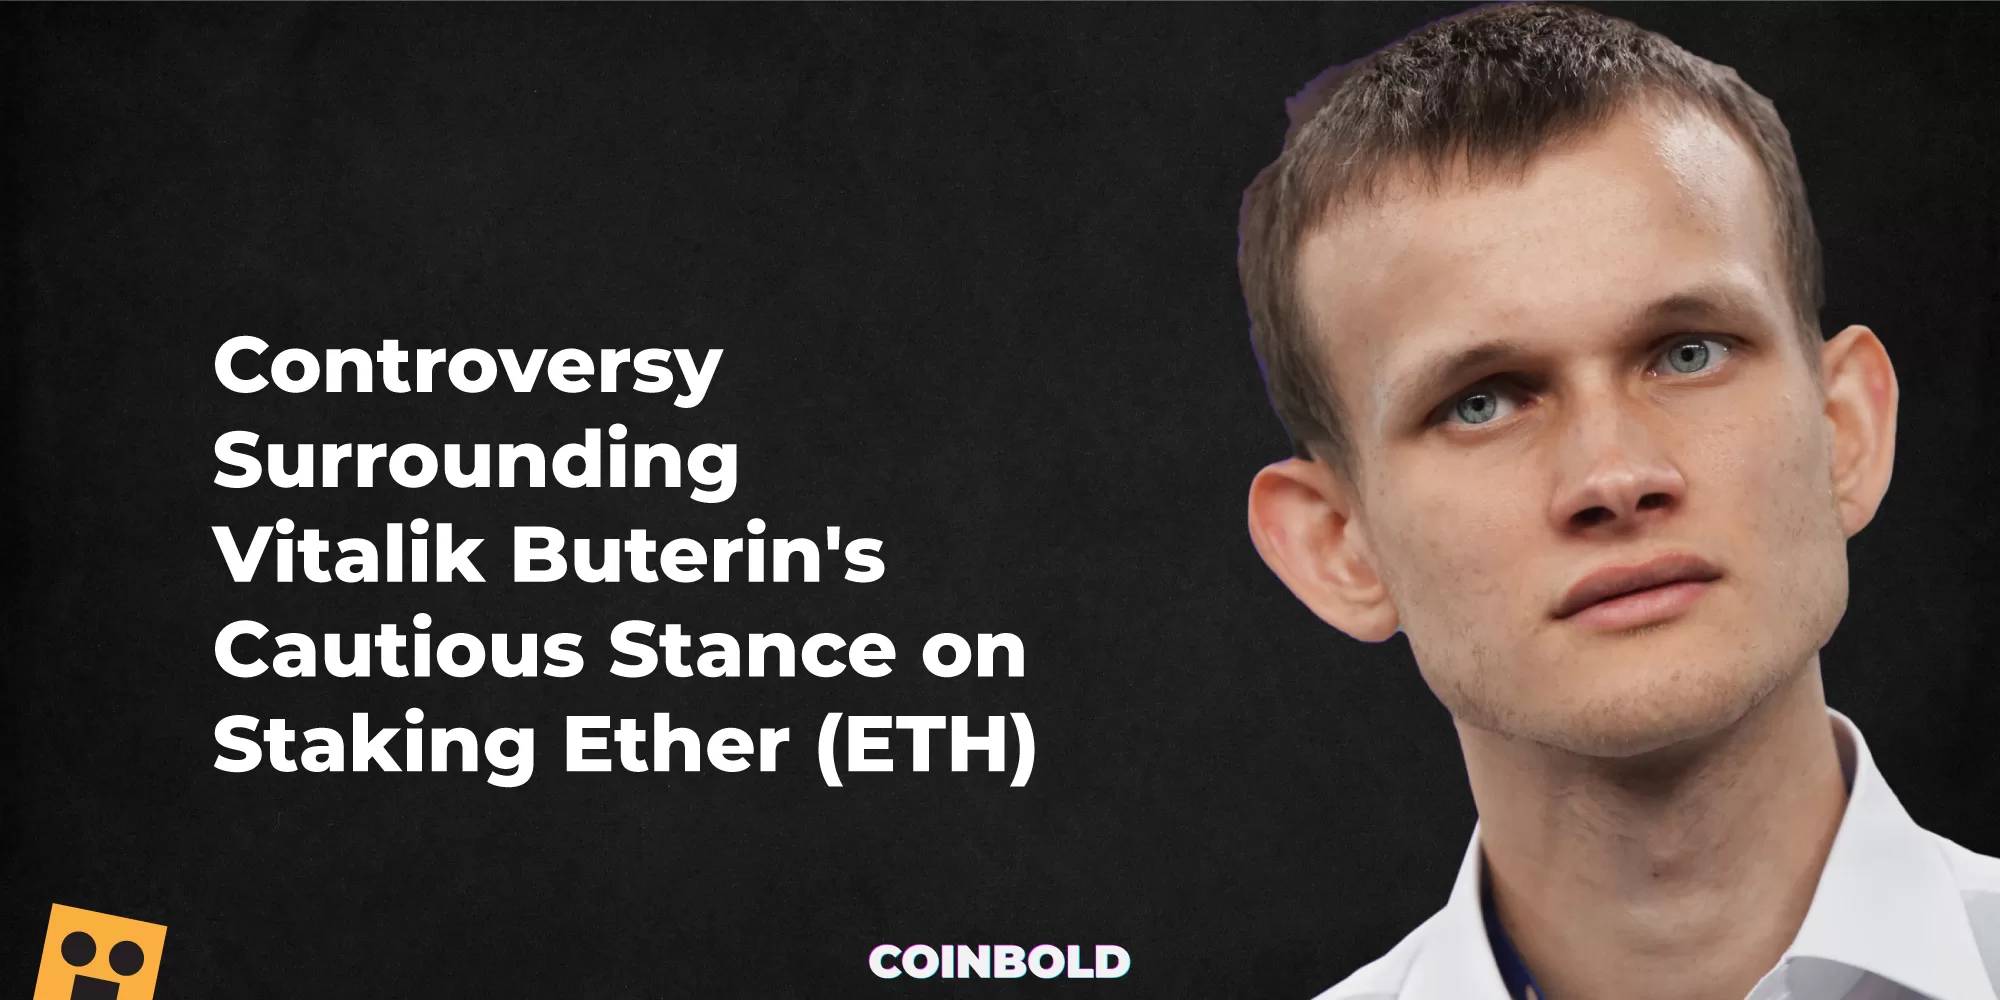 Controversy Surrounding Vitalik Buterin's Cautious Stance on Staking Ether (ETH)